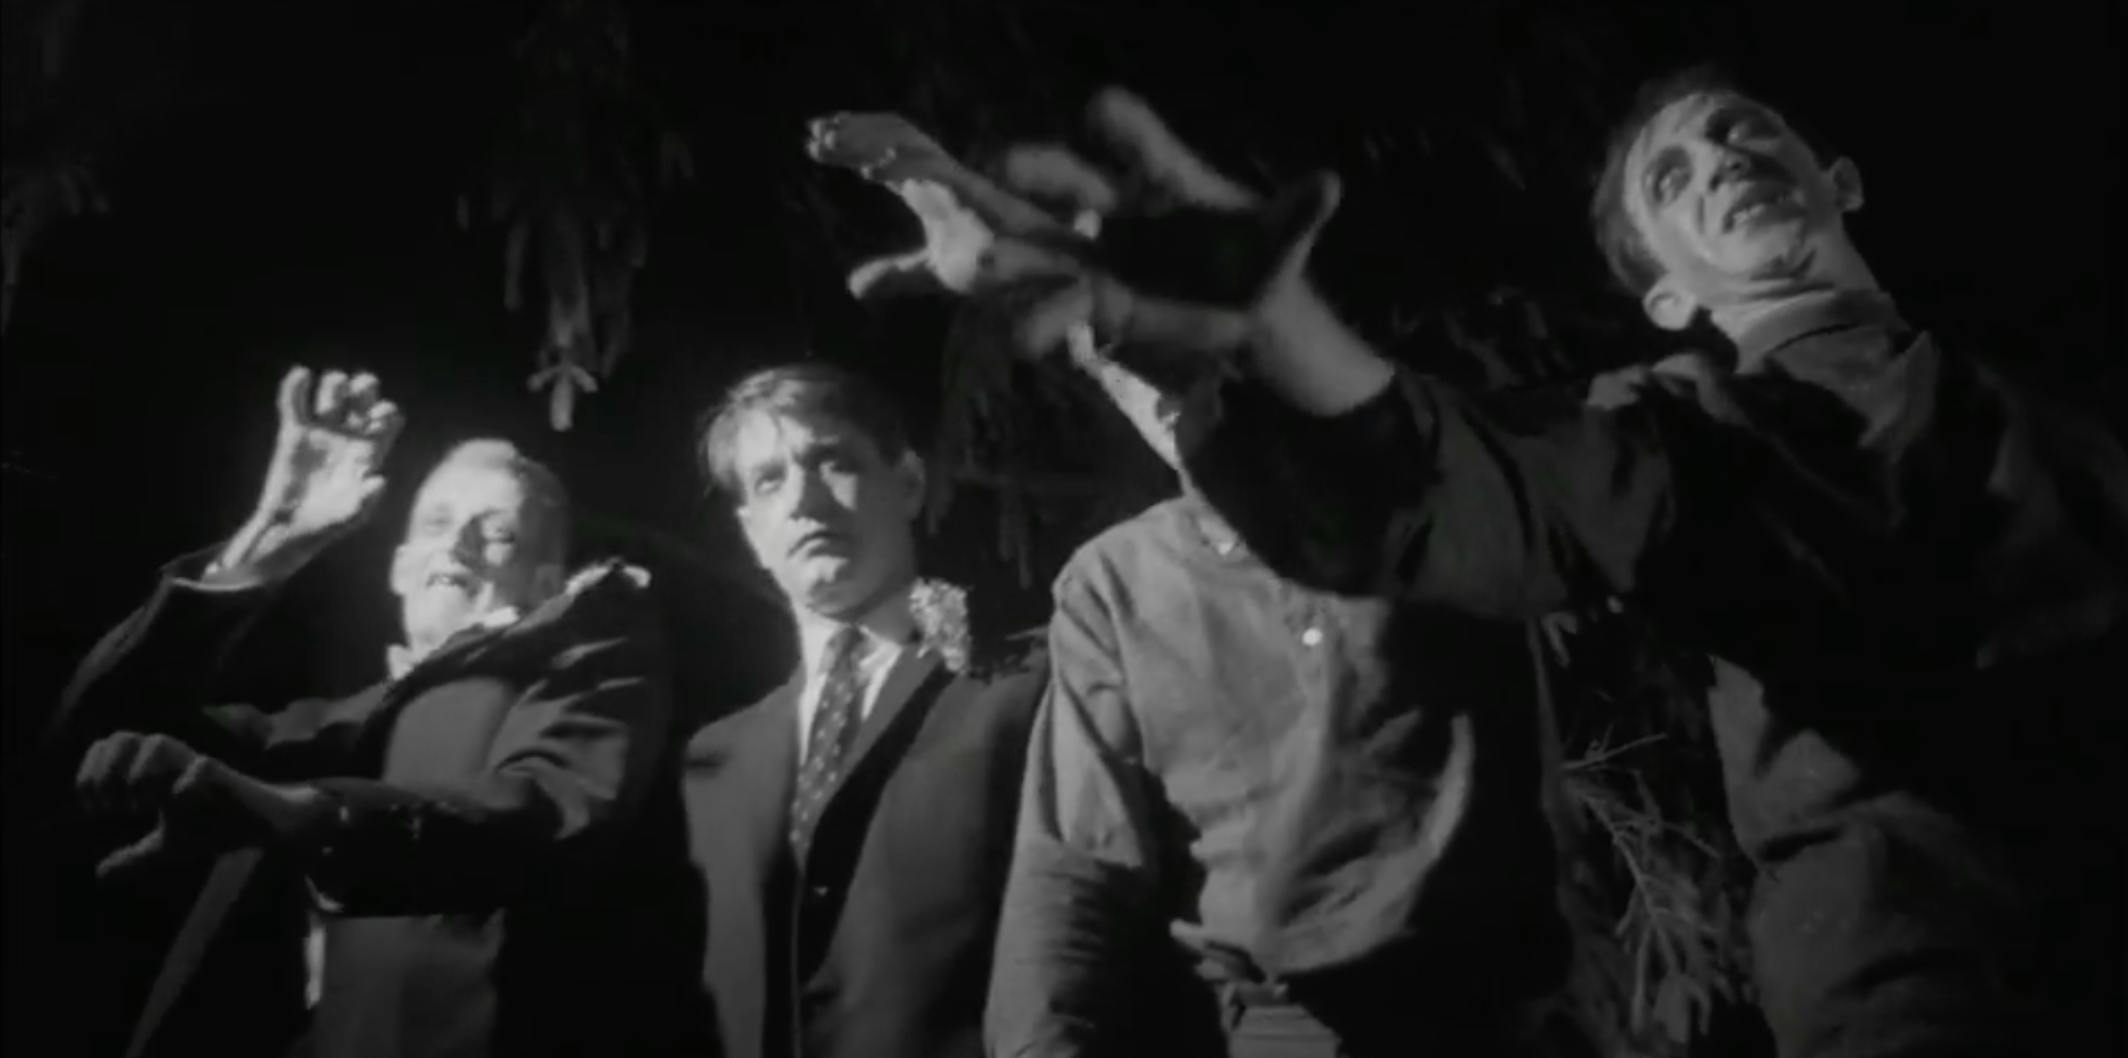 good classic movies on amazon prime : night of the living dead